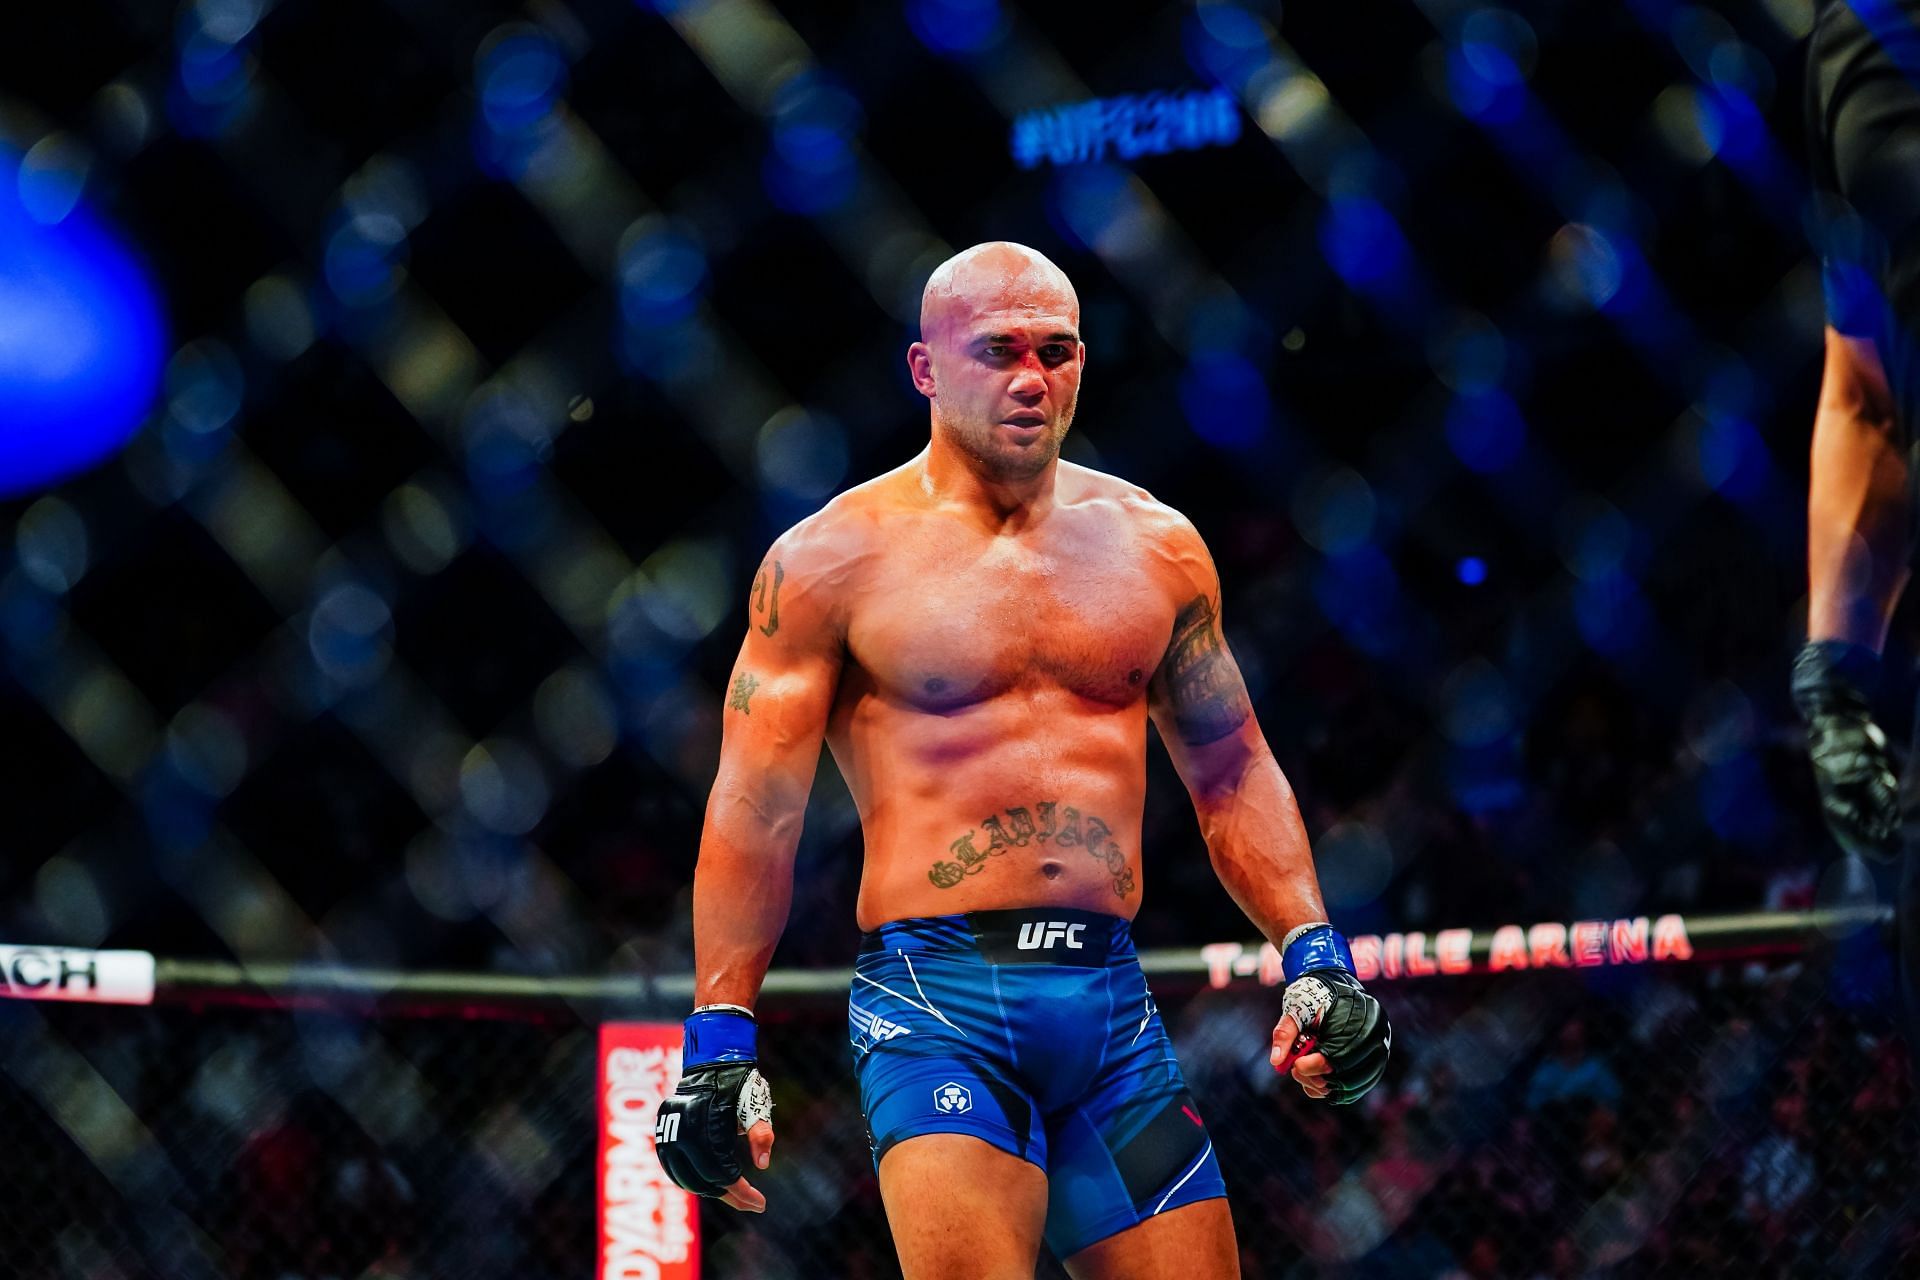 Robbie Lawler has a record of 29-15 (1 NC)